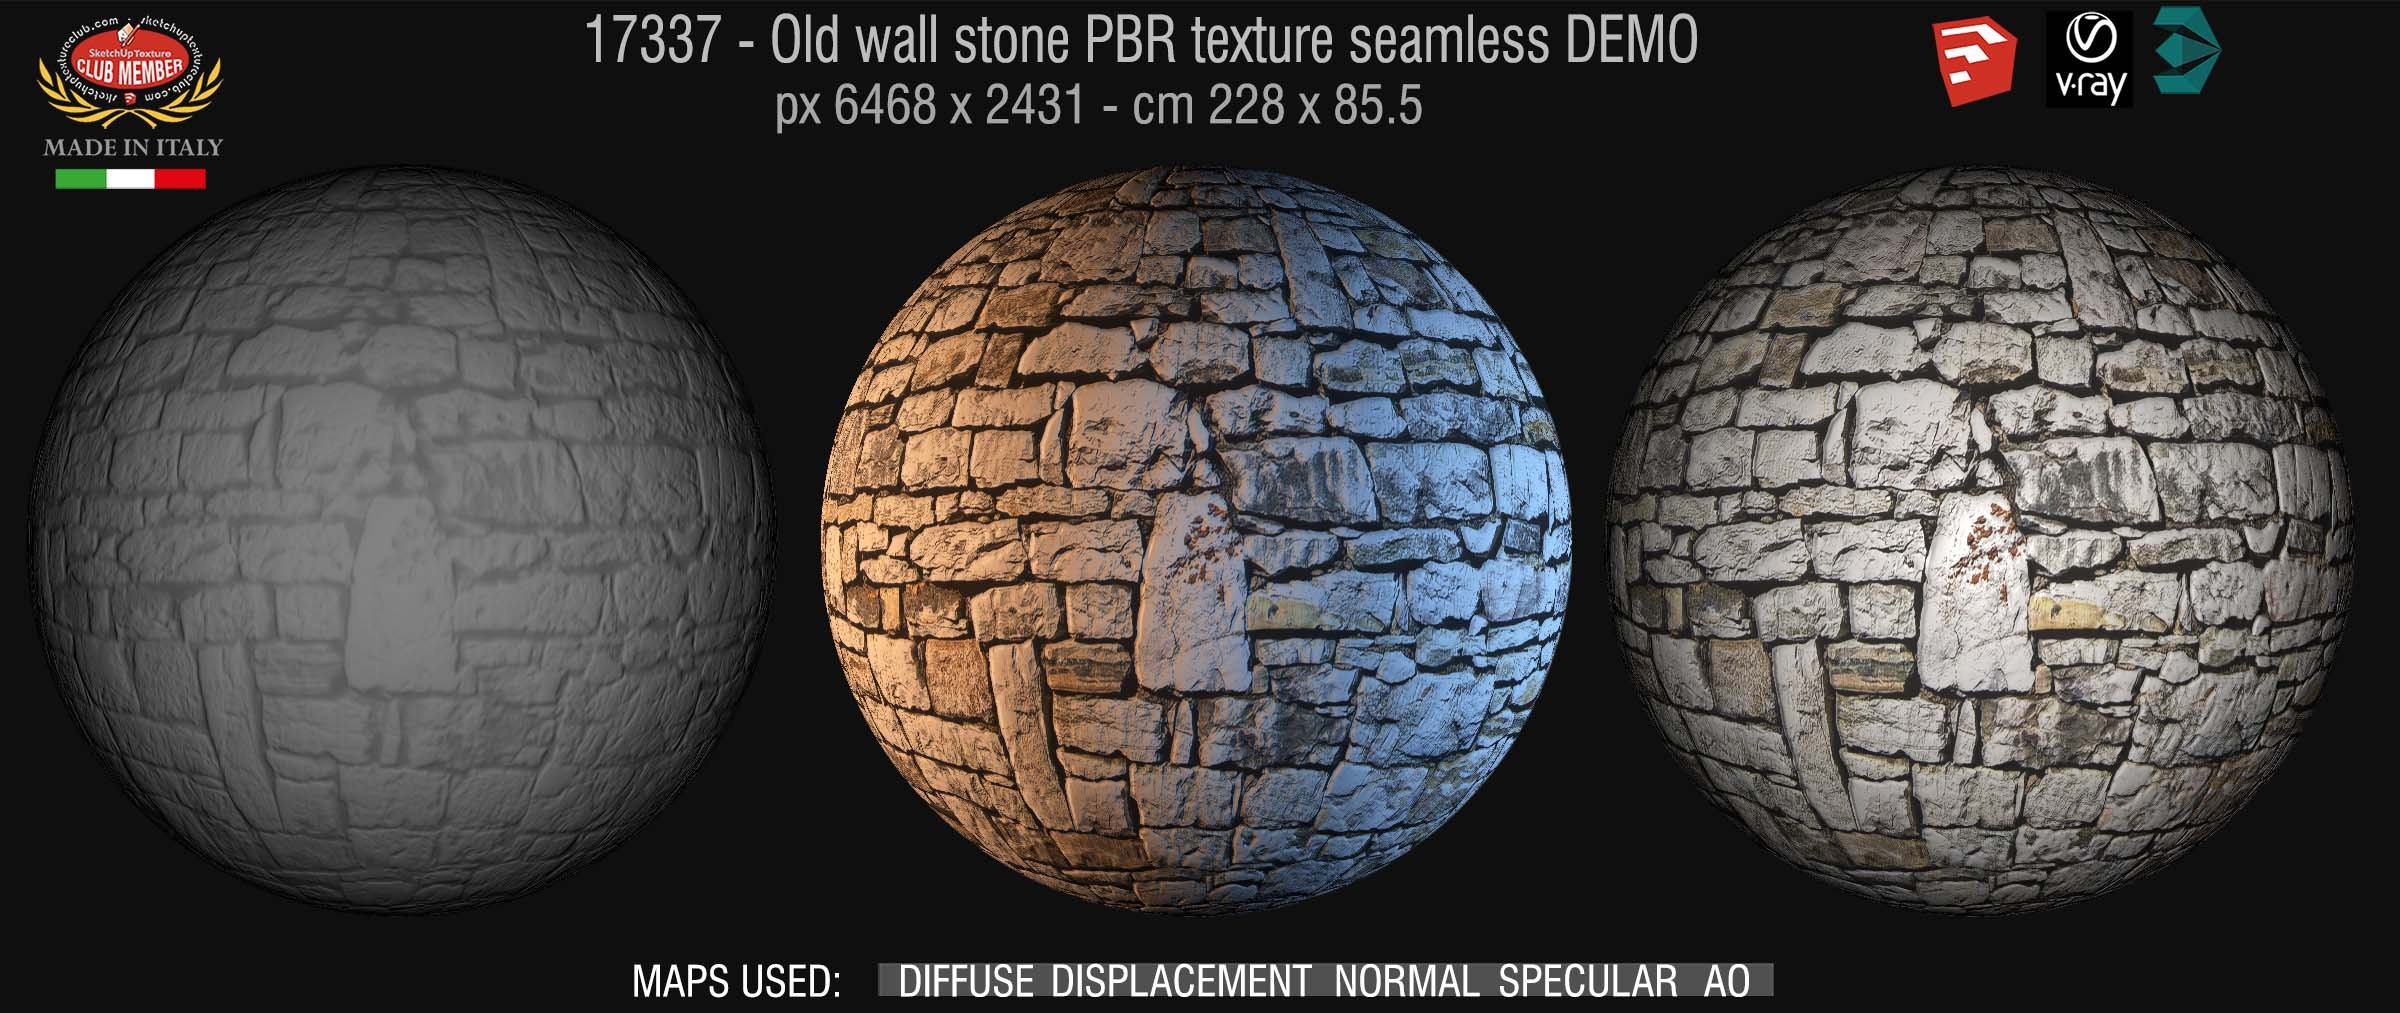 17337 Old wall stone PBR texture seamless DEMO